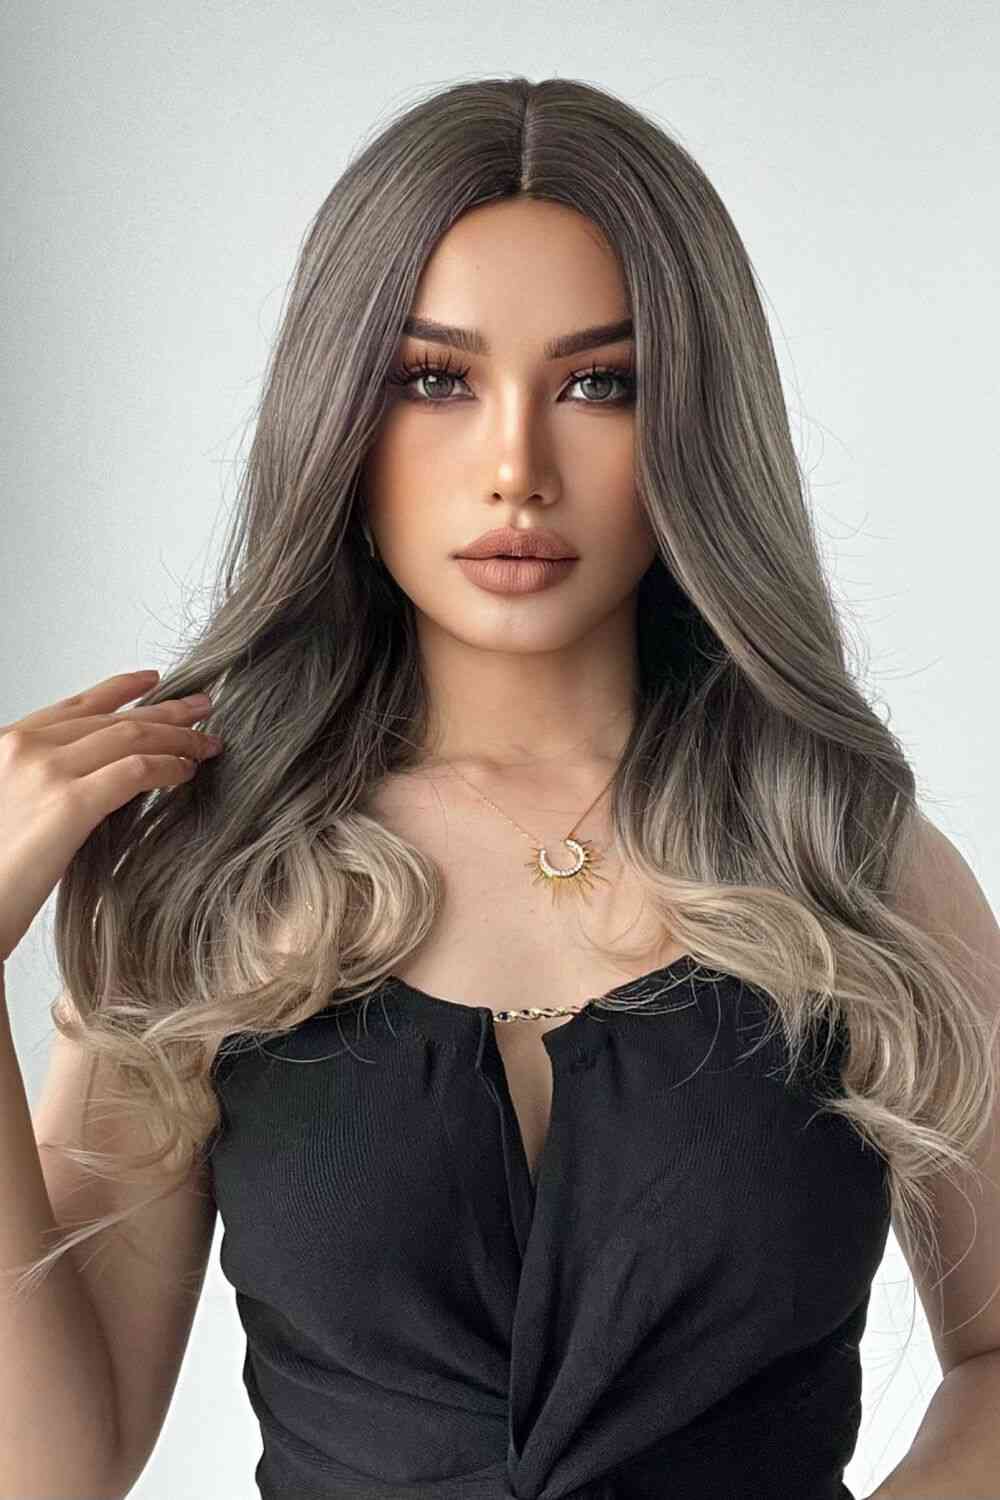 13*1" Full-Machine Wigs Synthetic Long Straight 24" Ash Brown/Blonde Ombre One Size 